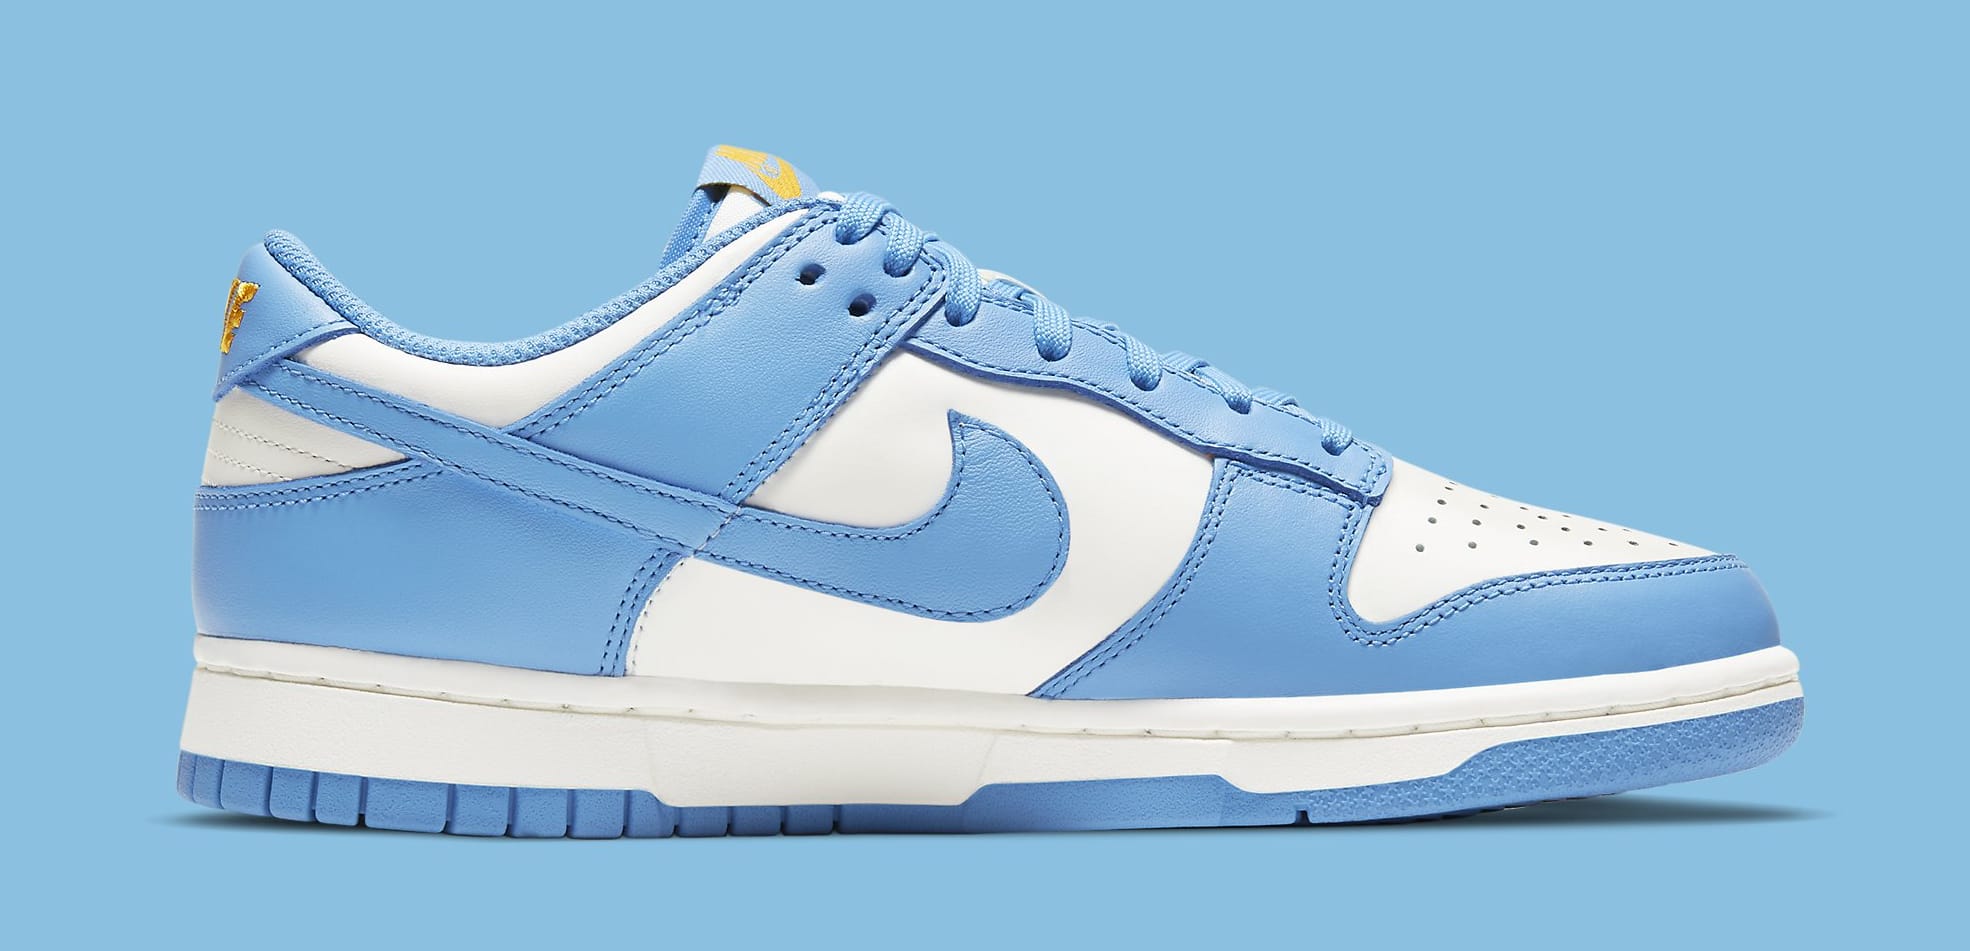 Detailed Look at the 'Coast' Nike Dunk Lows This women's exclusive